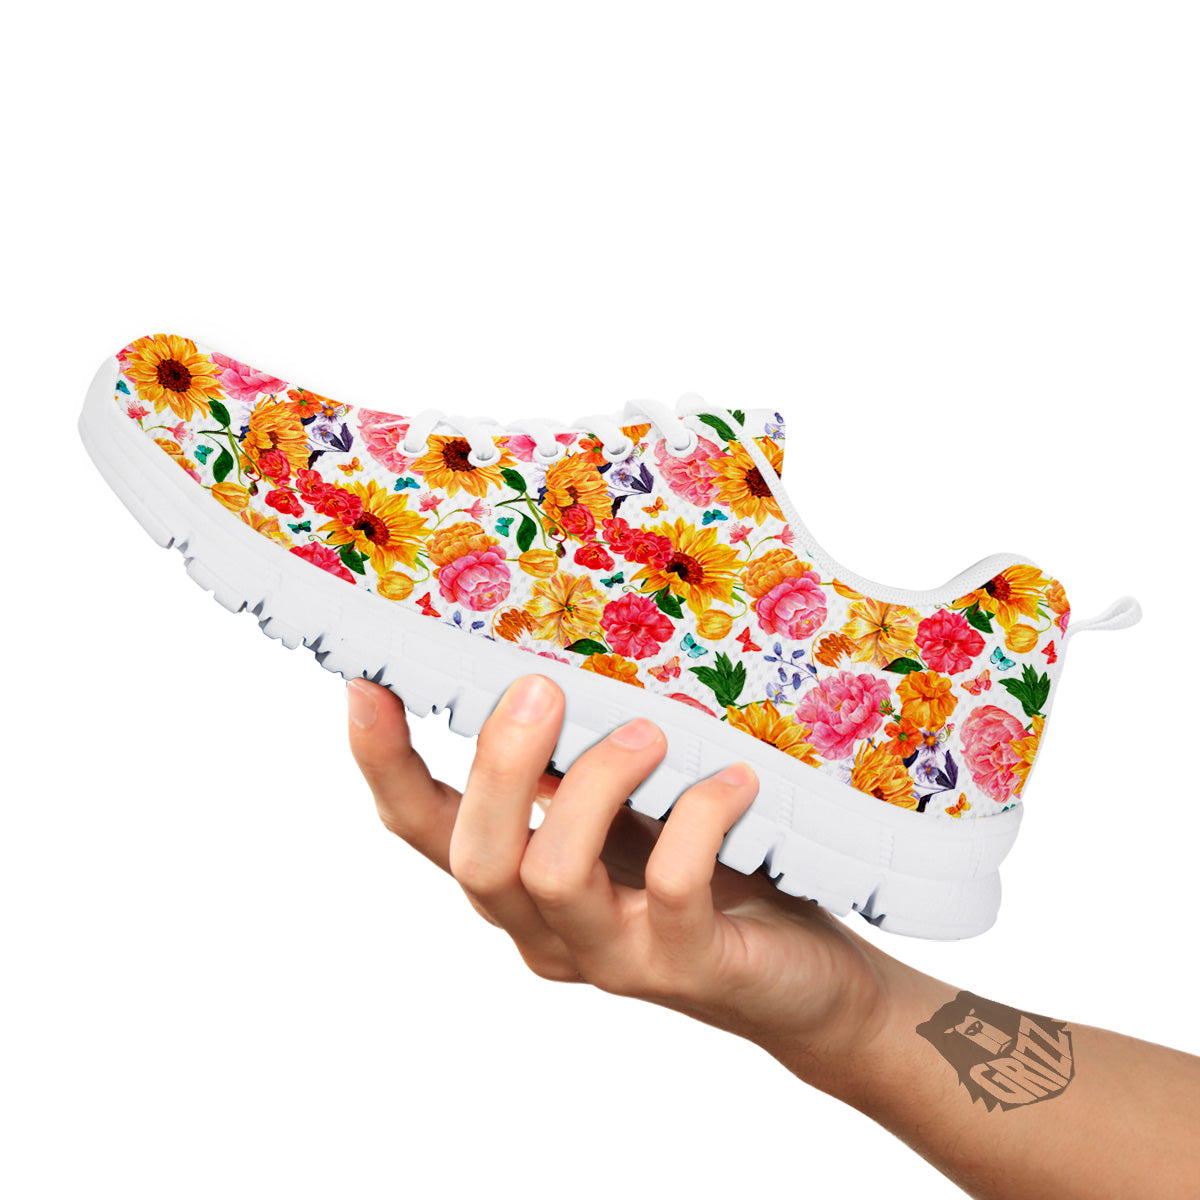 Butterfly Sunflowers Peonies Print Pattern White Sneaker-grizzshop